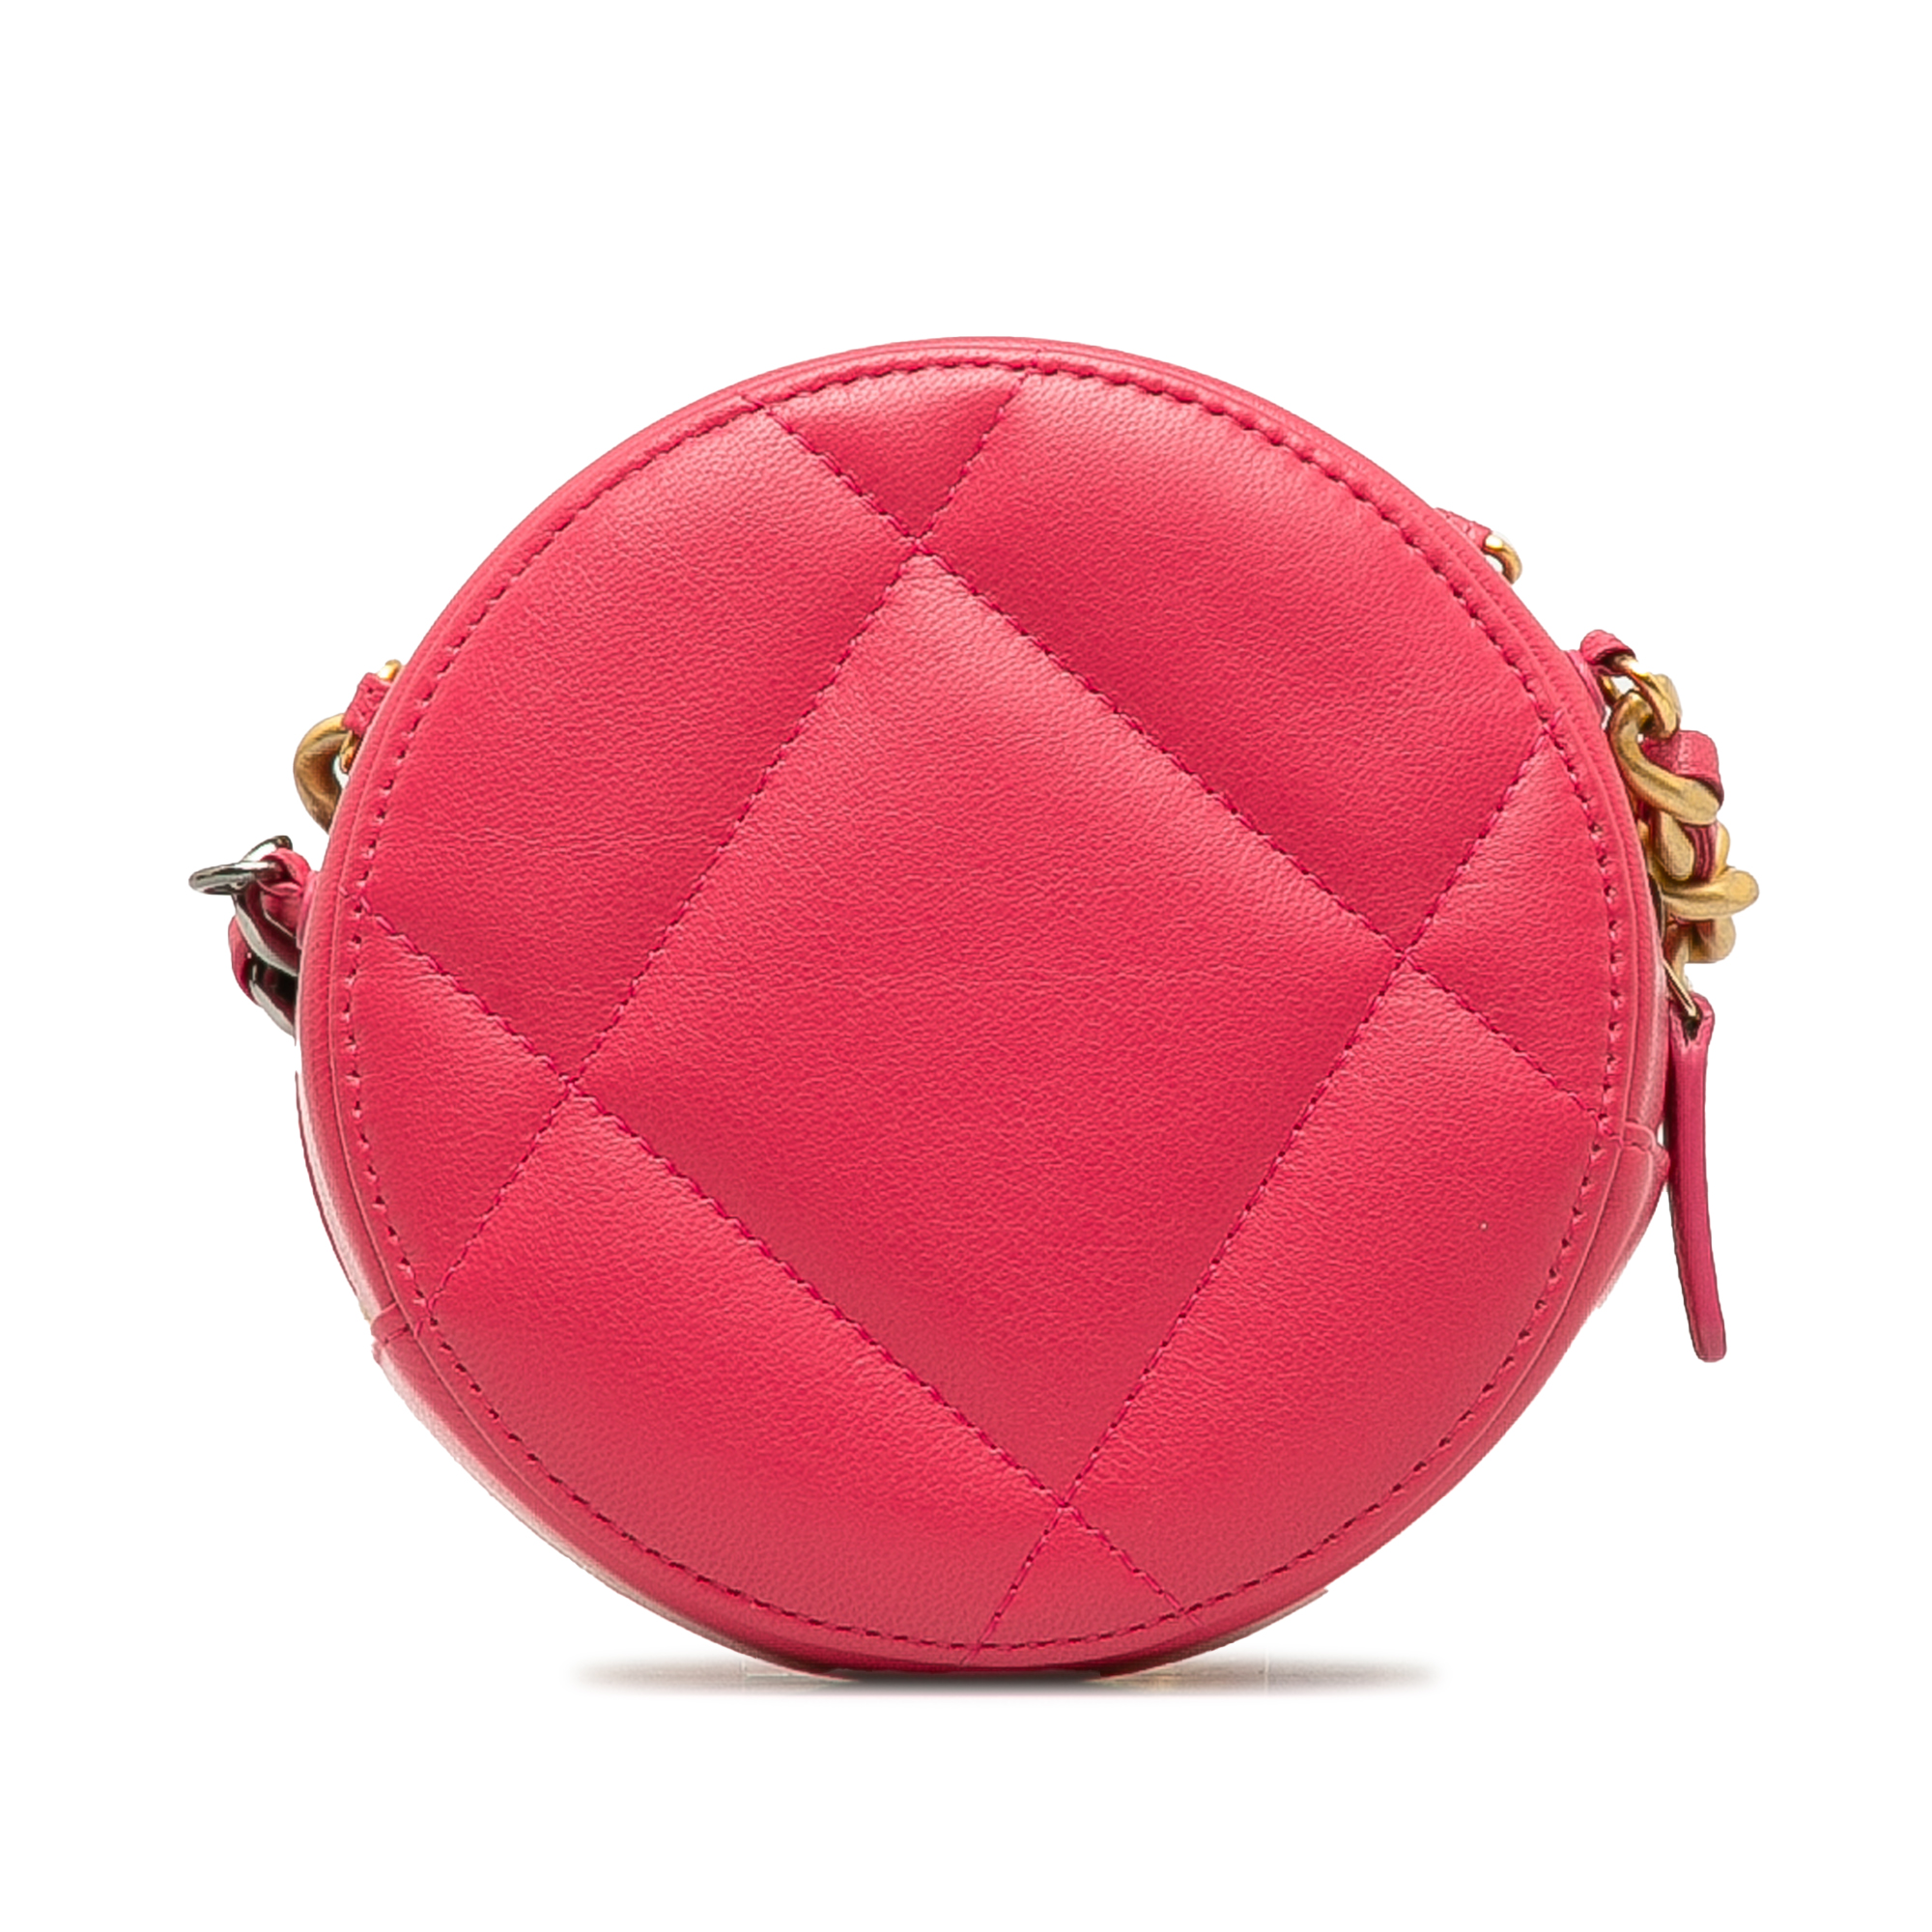 Chanel 19 Round Lambskin Clutch With Chain - Image 3 of 10